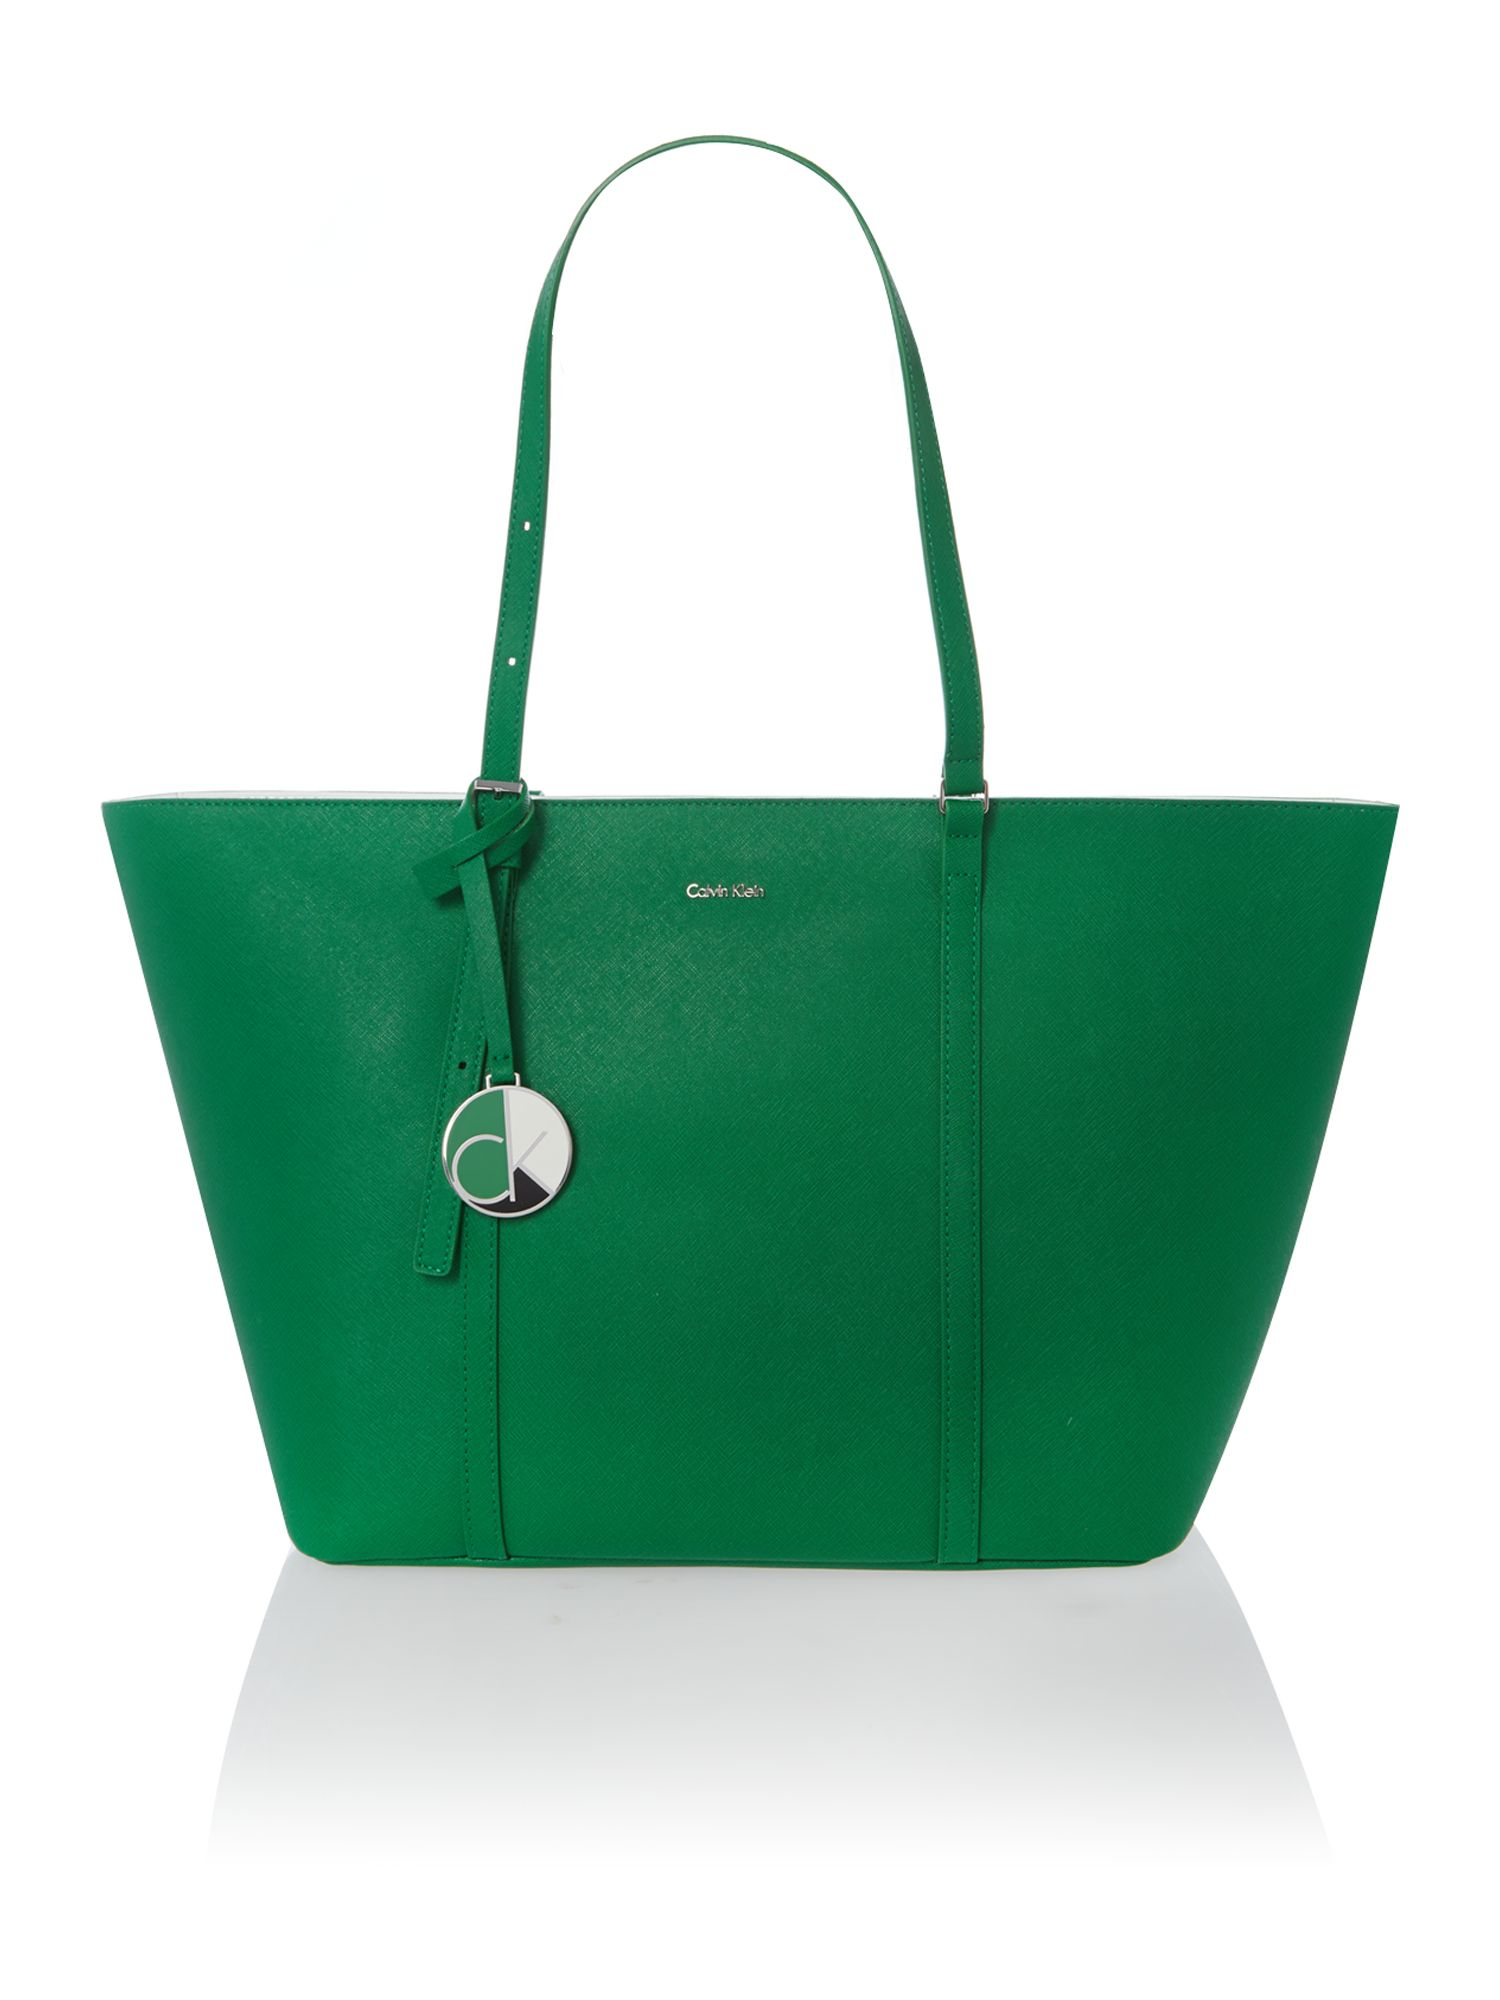 Calvin Klein Sofie Green Large Tote Bag in Green | Lyst